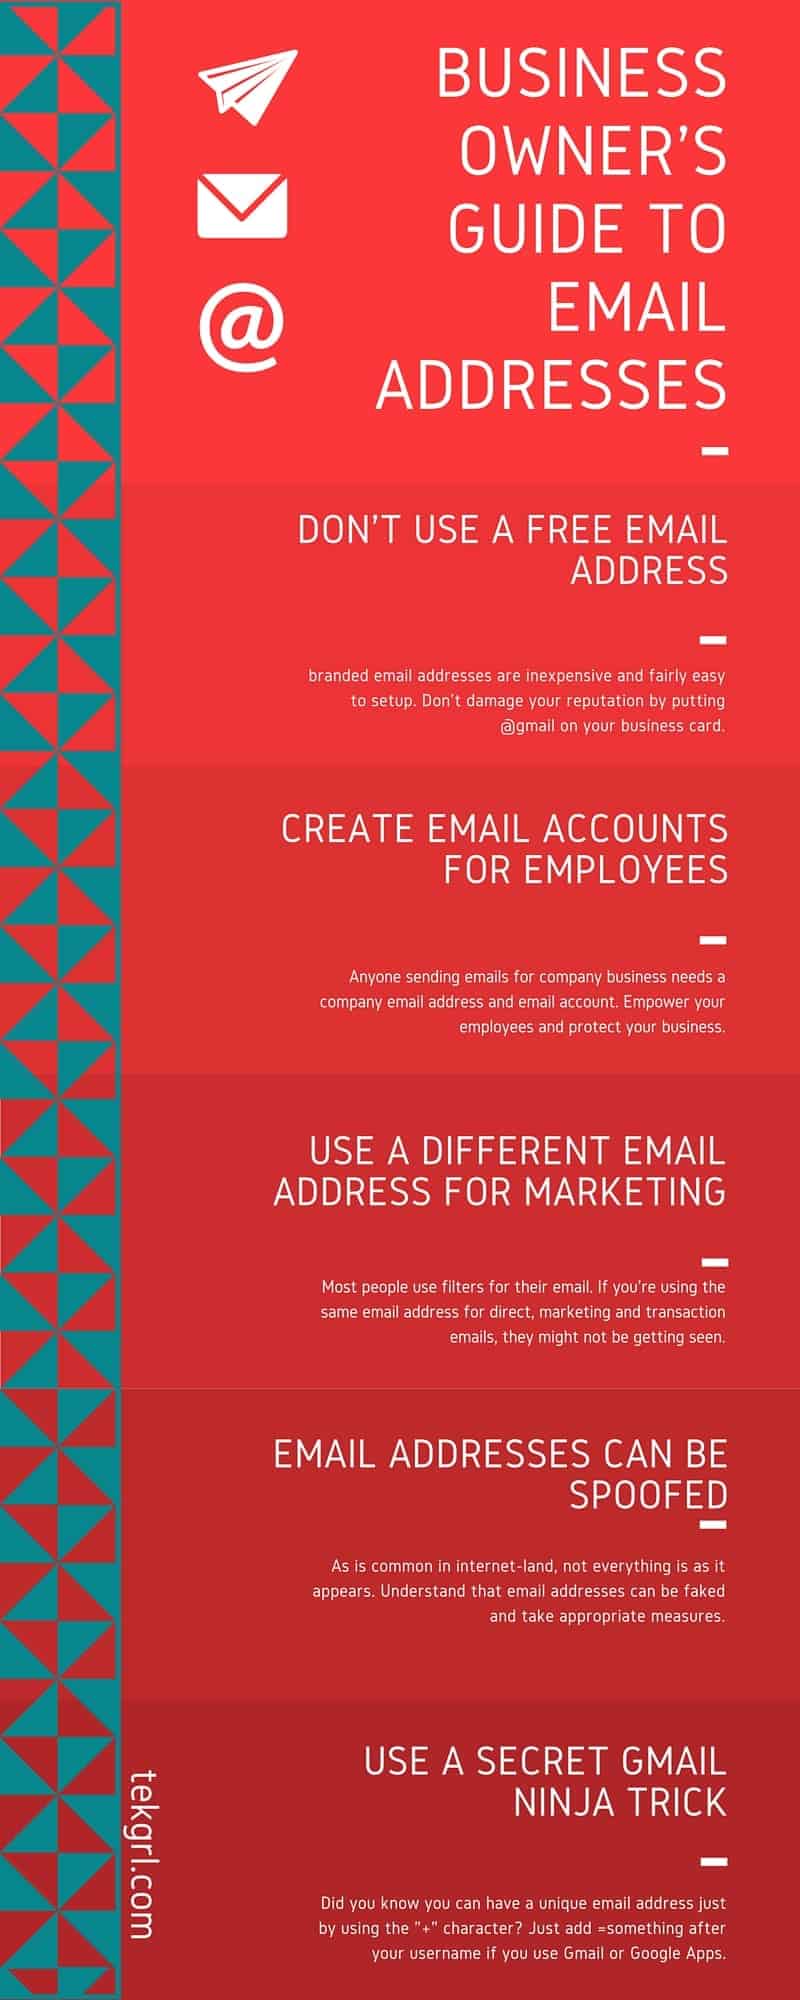 What type of email addresses do businesses use?